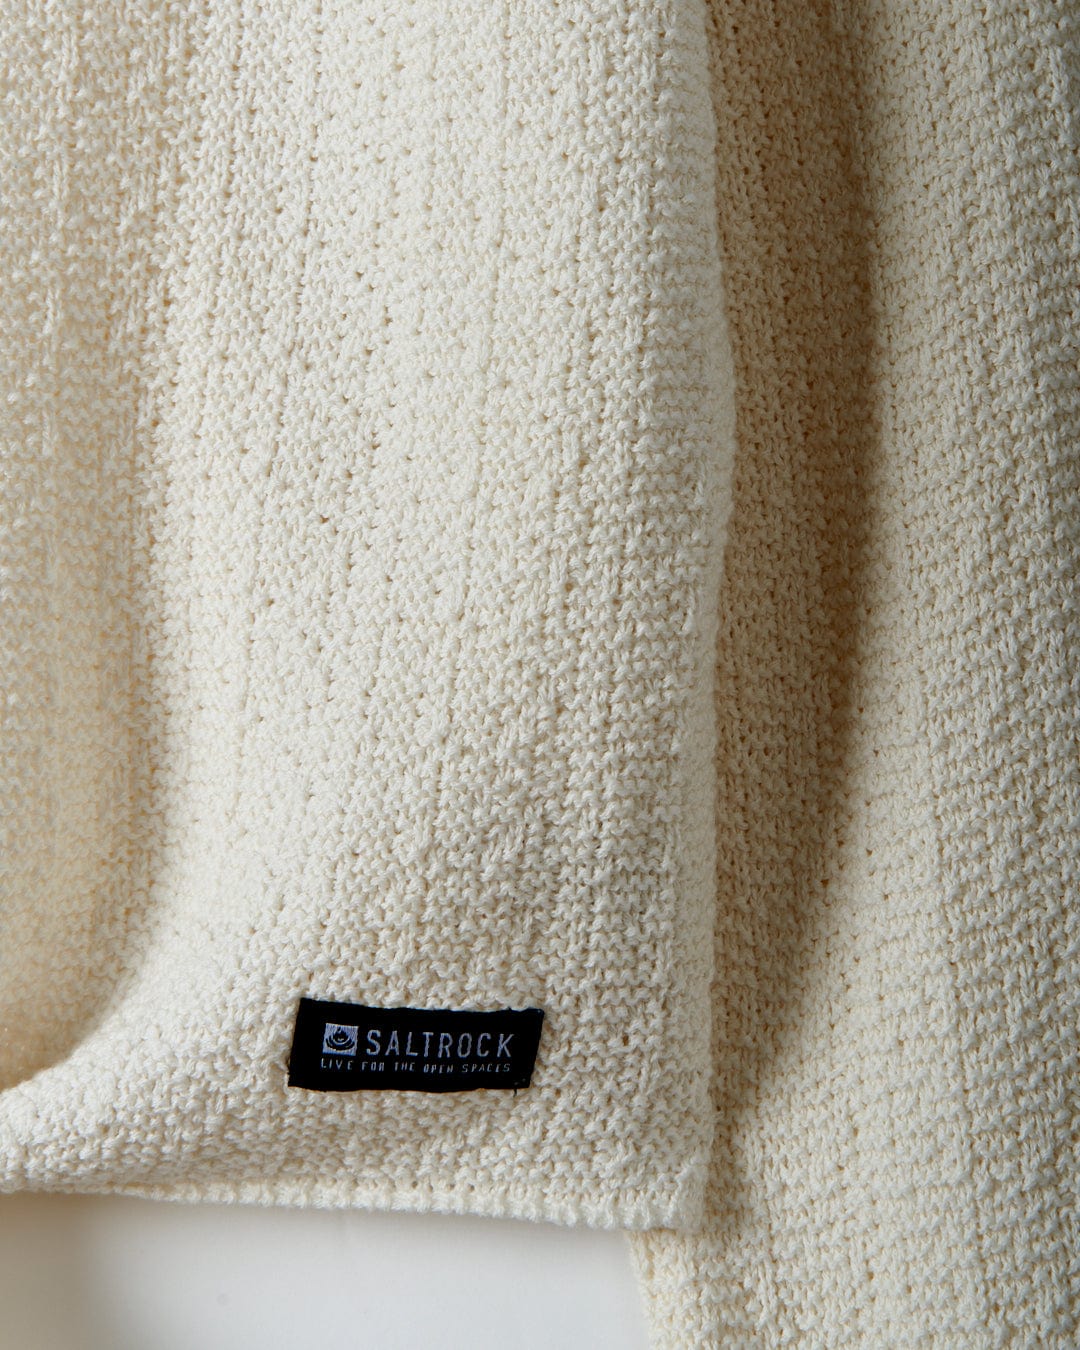 Close-up of a textured knit white towel with a black 